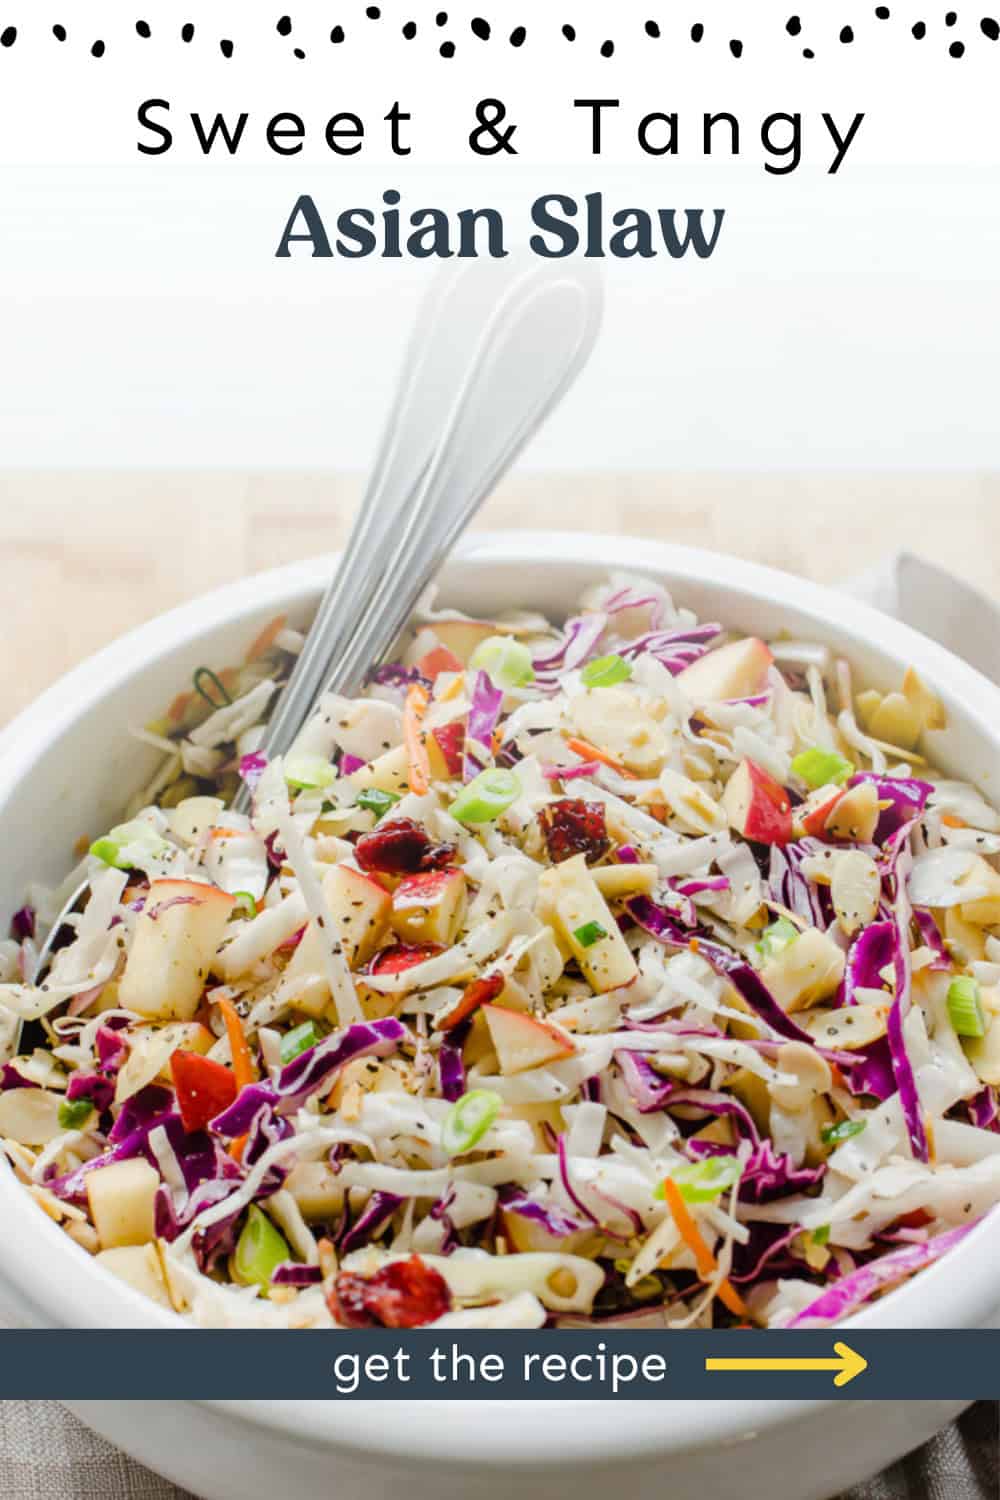 A bowl of Asian slaw with two spoons in it.